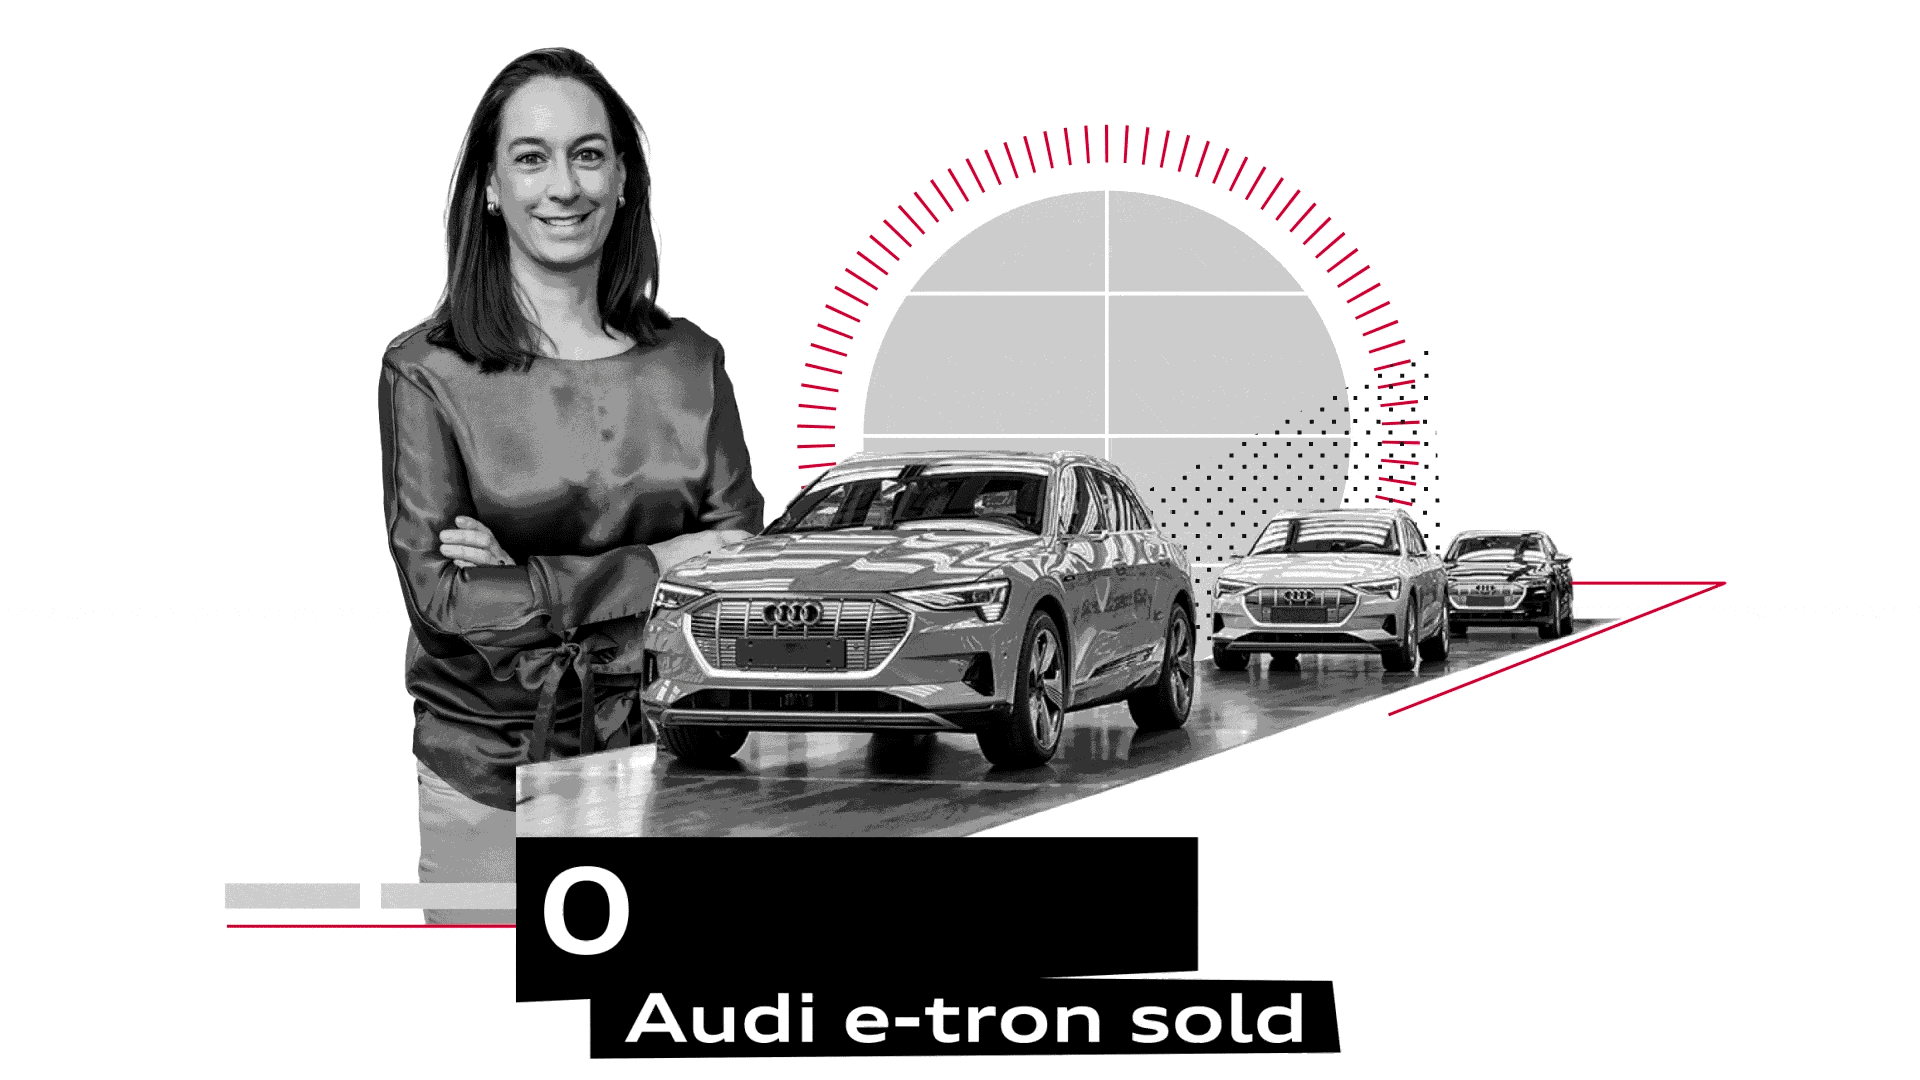  Christiane Zorn, Head of Product Marketing at AUDI AG (2022).